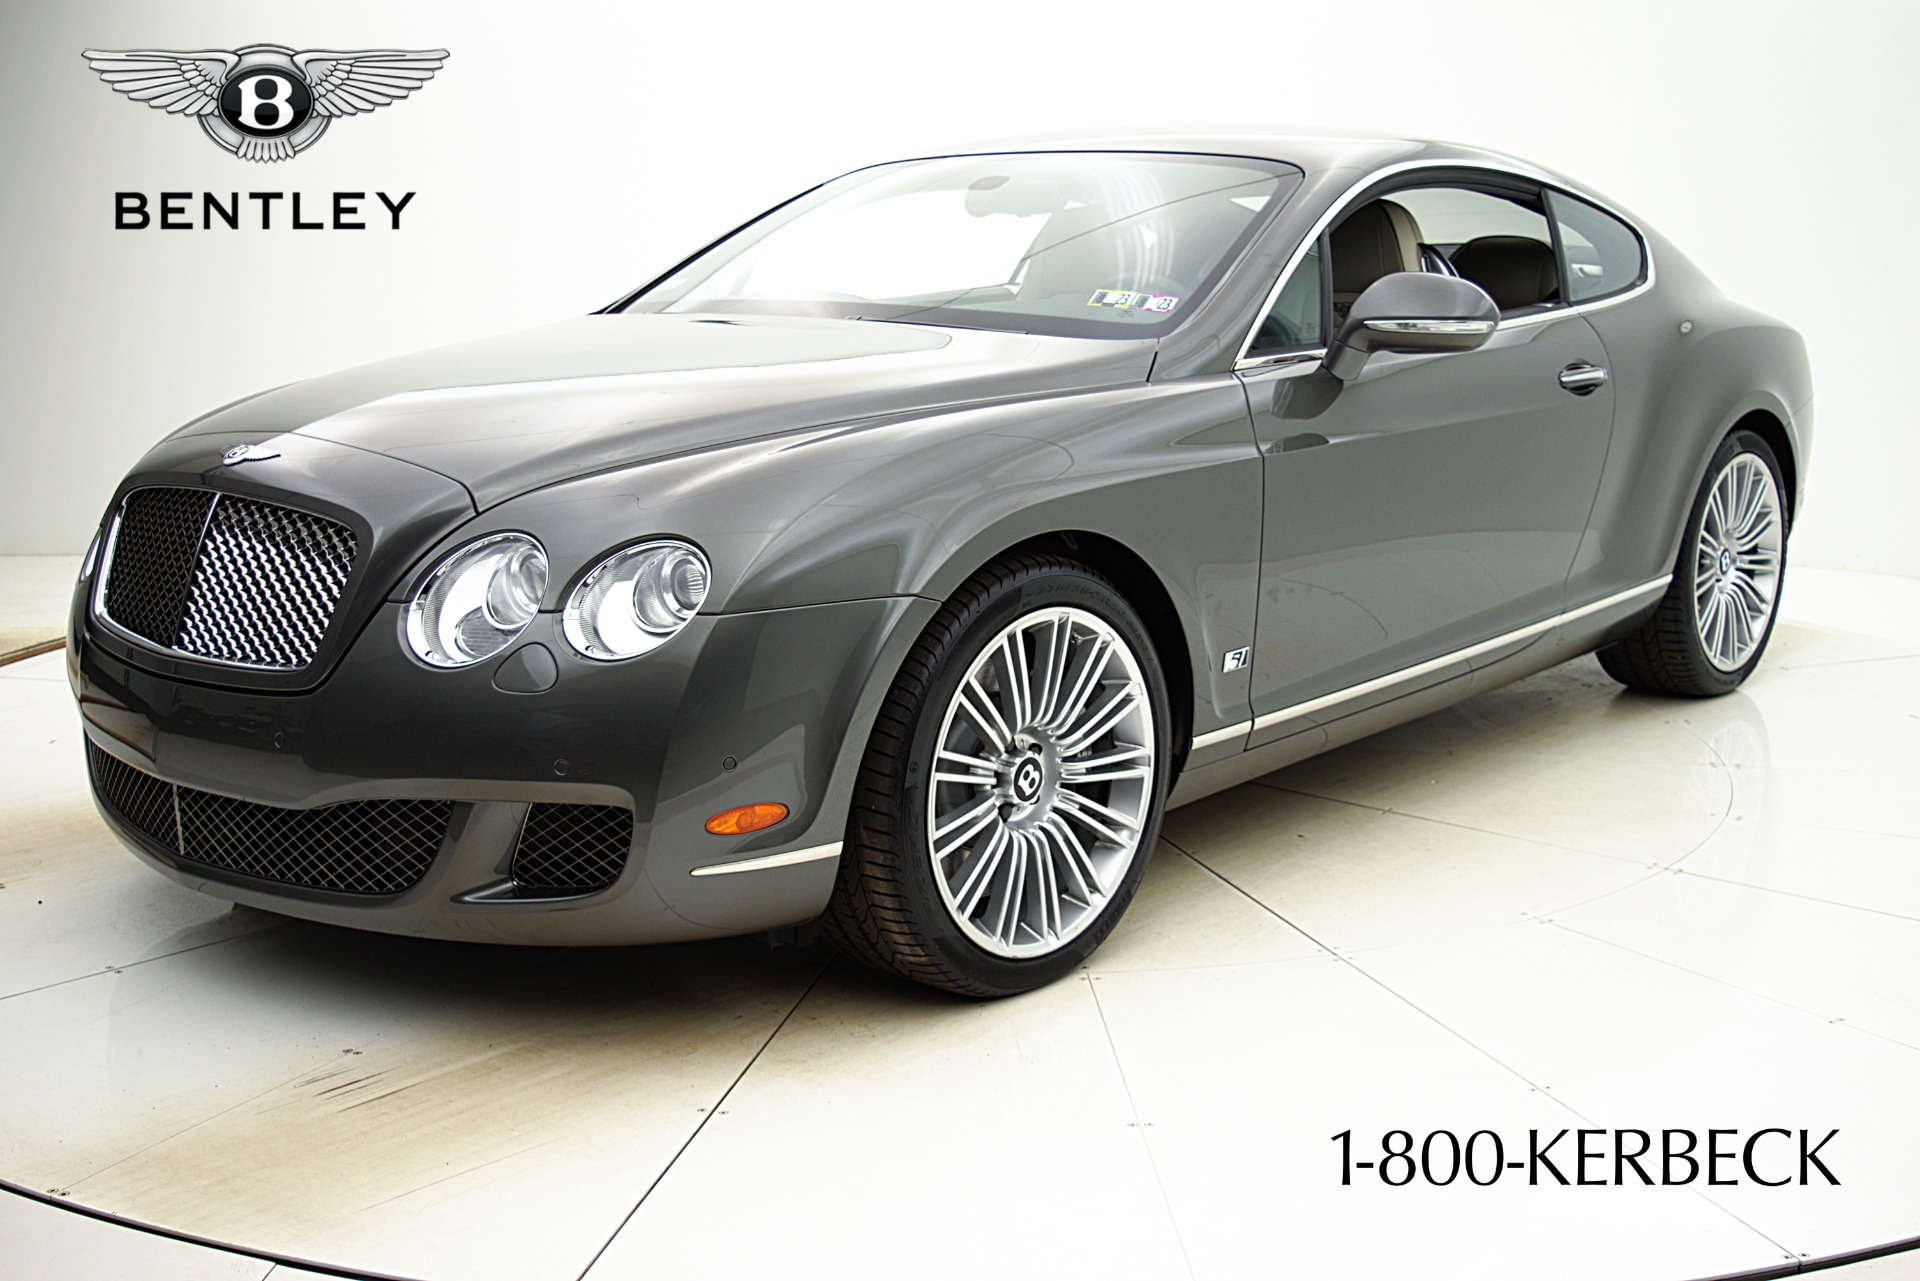 Used 2010 Bentley Continental GT Speed for sale $89,000 at Bentley Palmyra N.J. in Palmyra NJ 08065 2